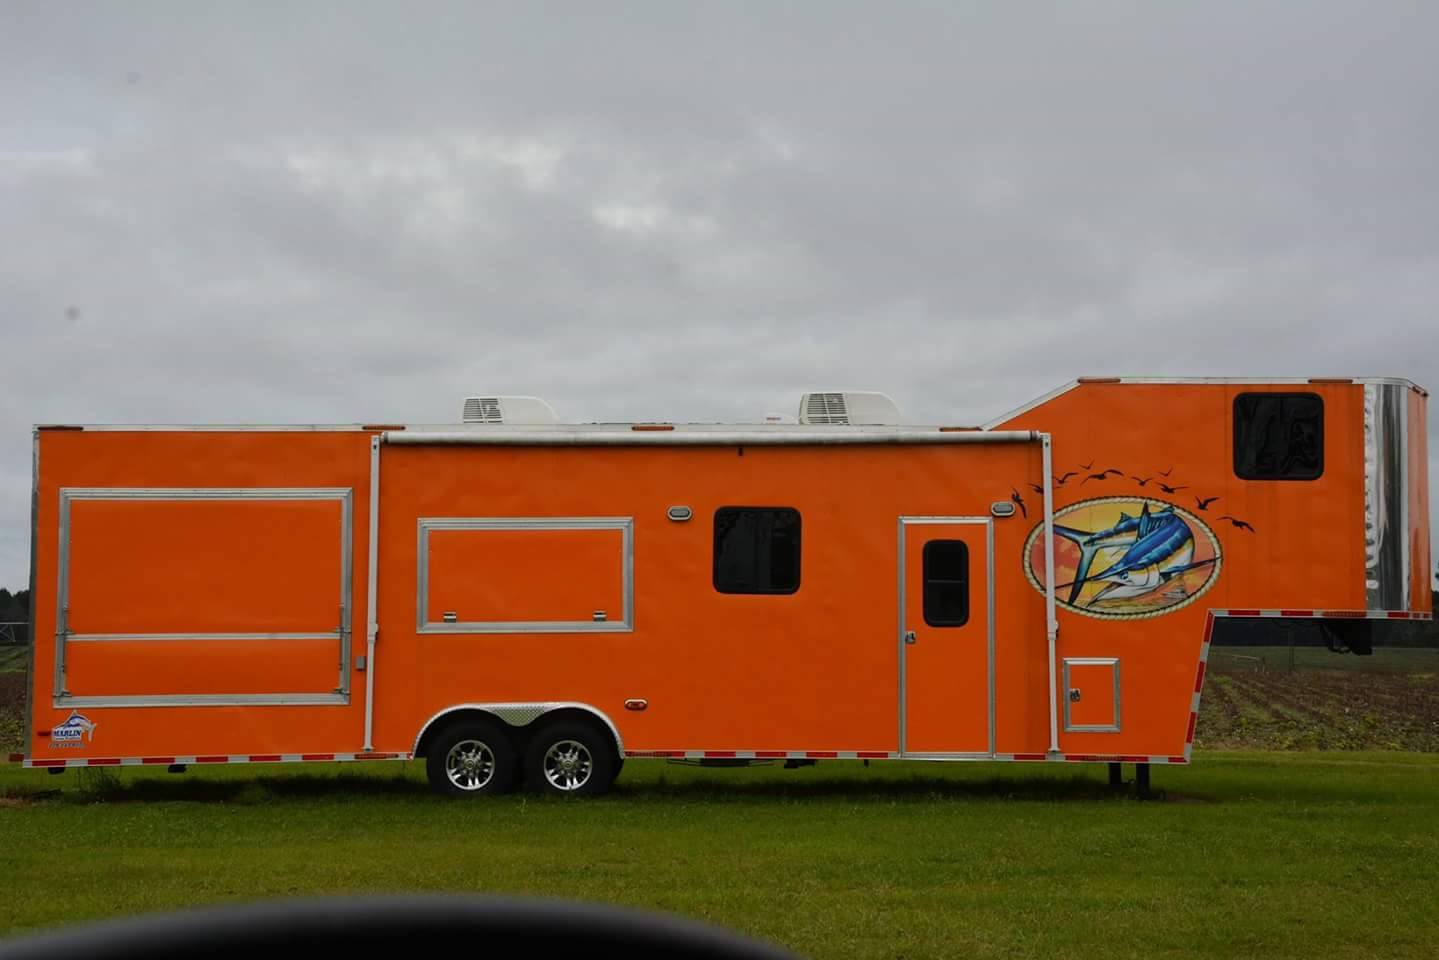 The image shows a bright orange and white recreational vehicle  RV  parked on grass, with visible branding and a logo that includes an airplane.